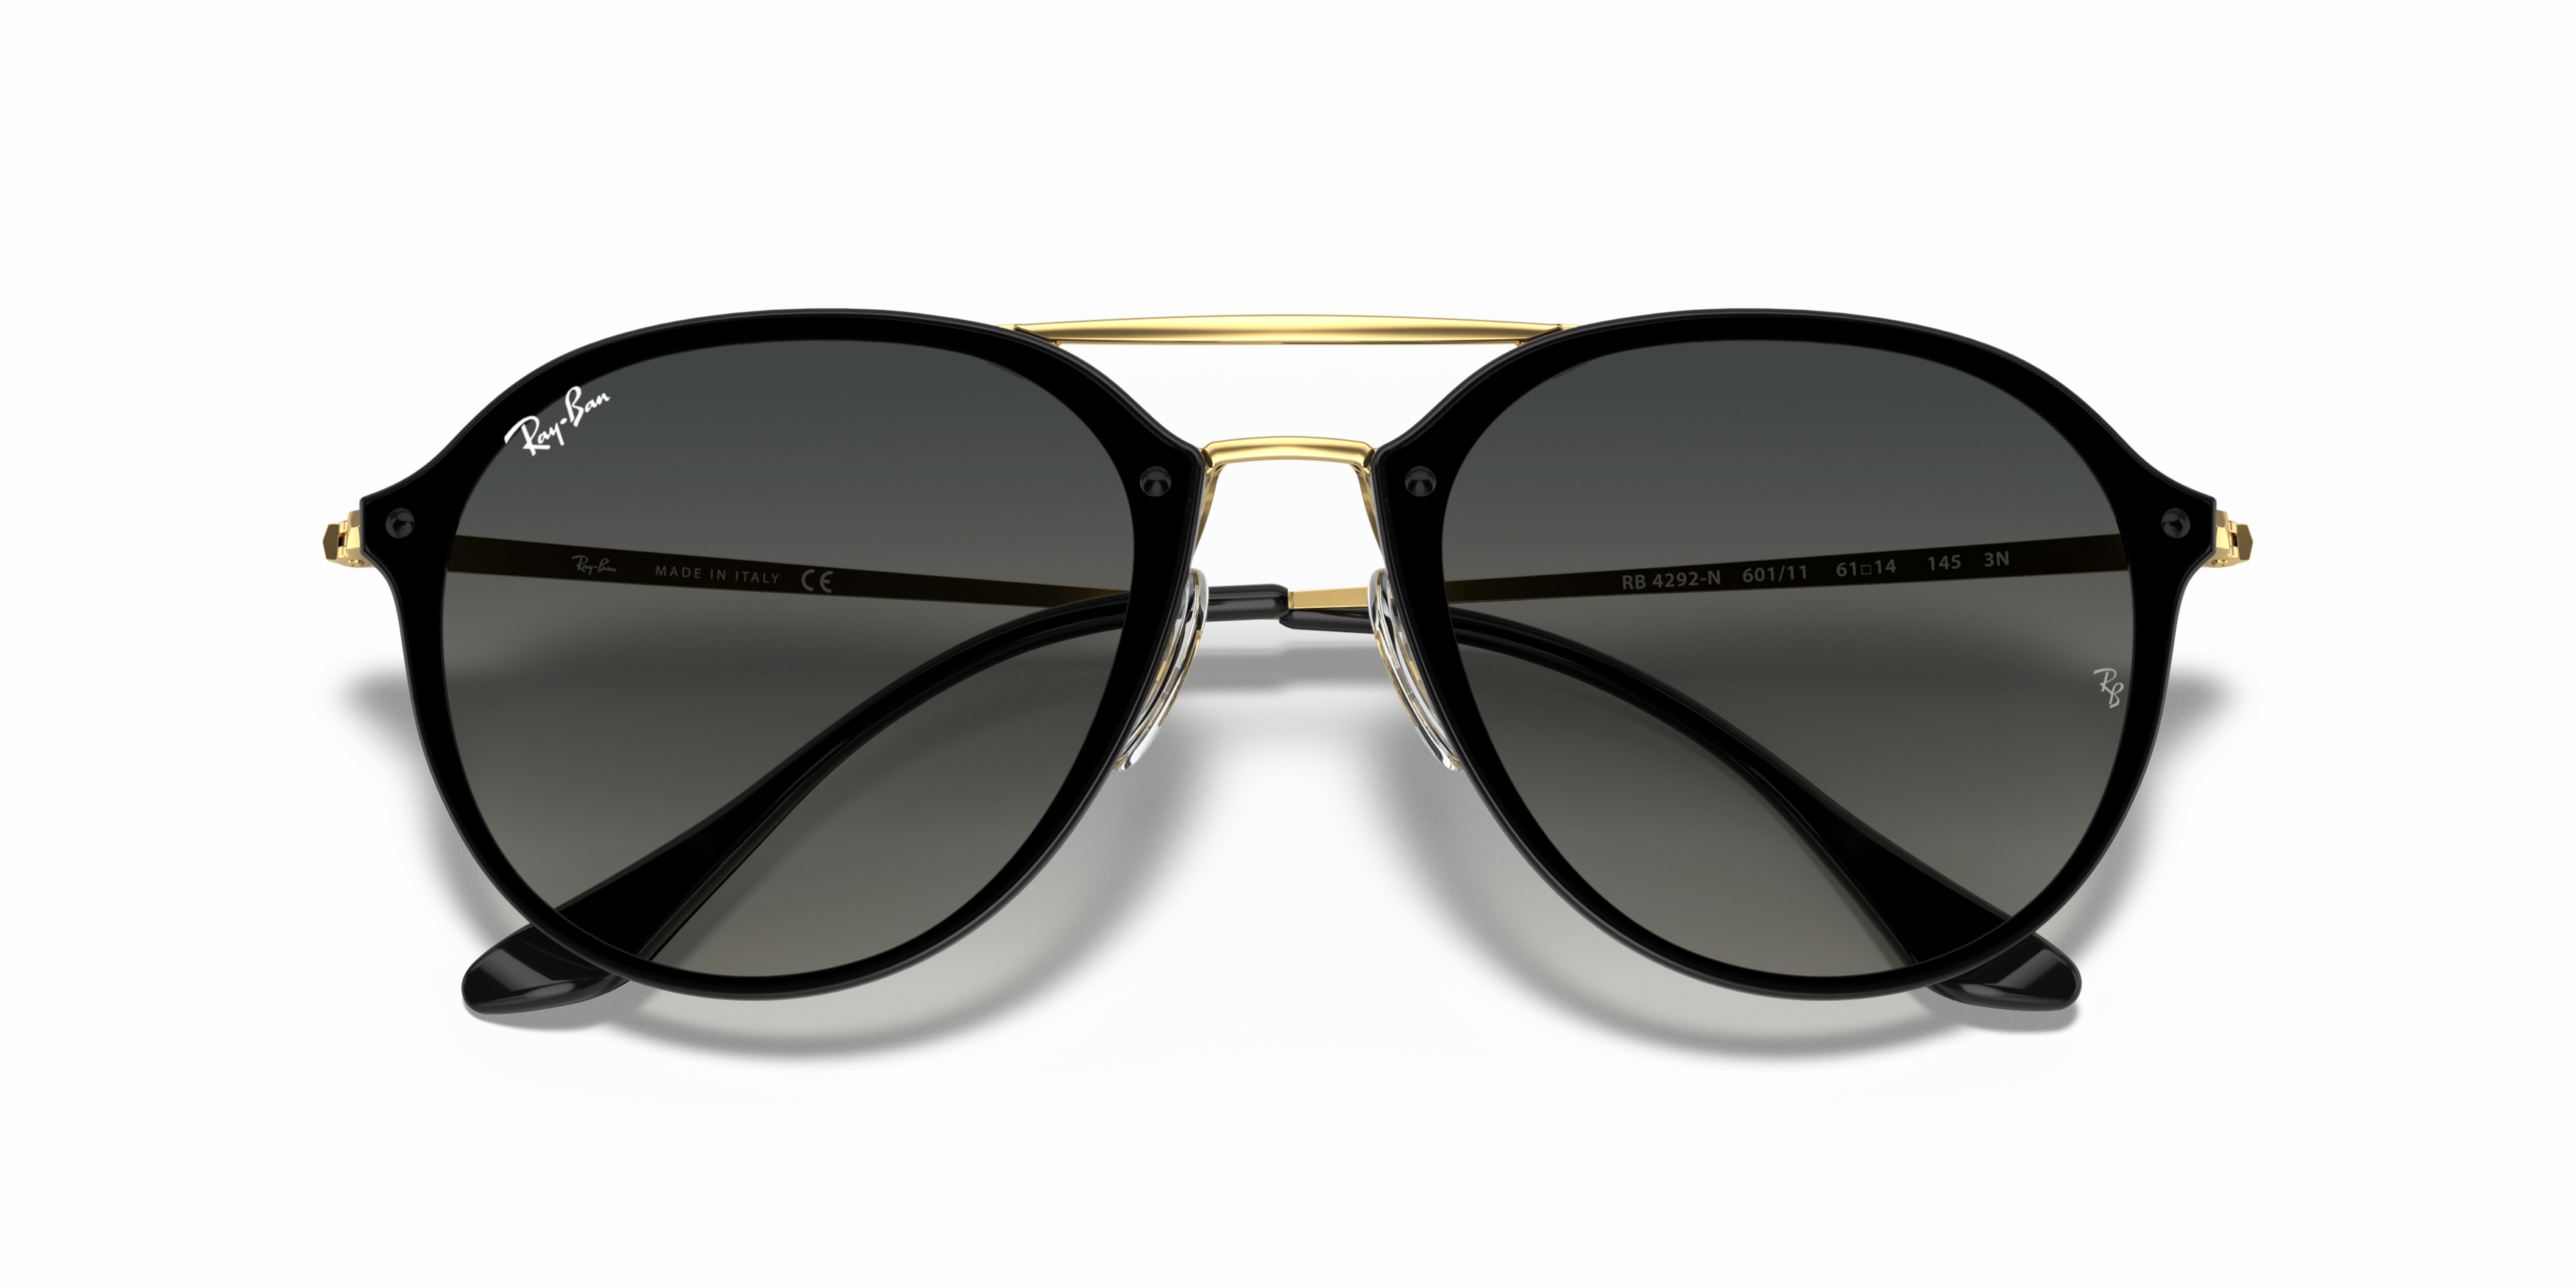 [products.image.folded] RAY-BAN RB4292N 601/11